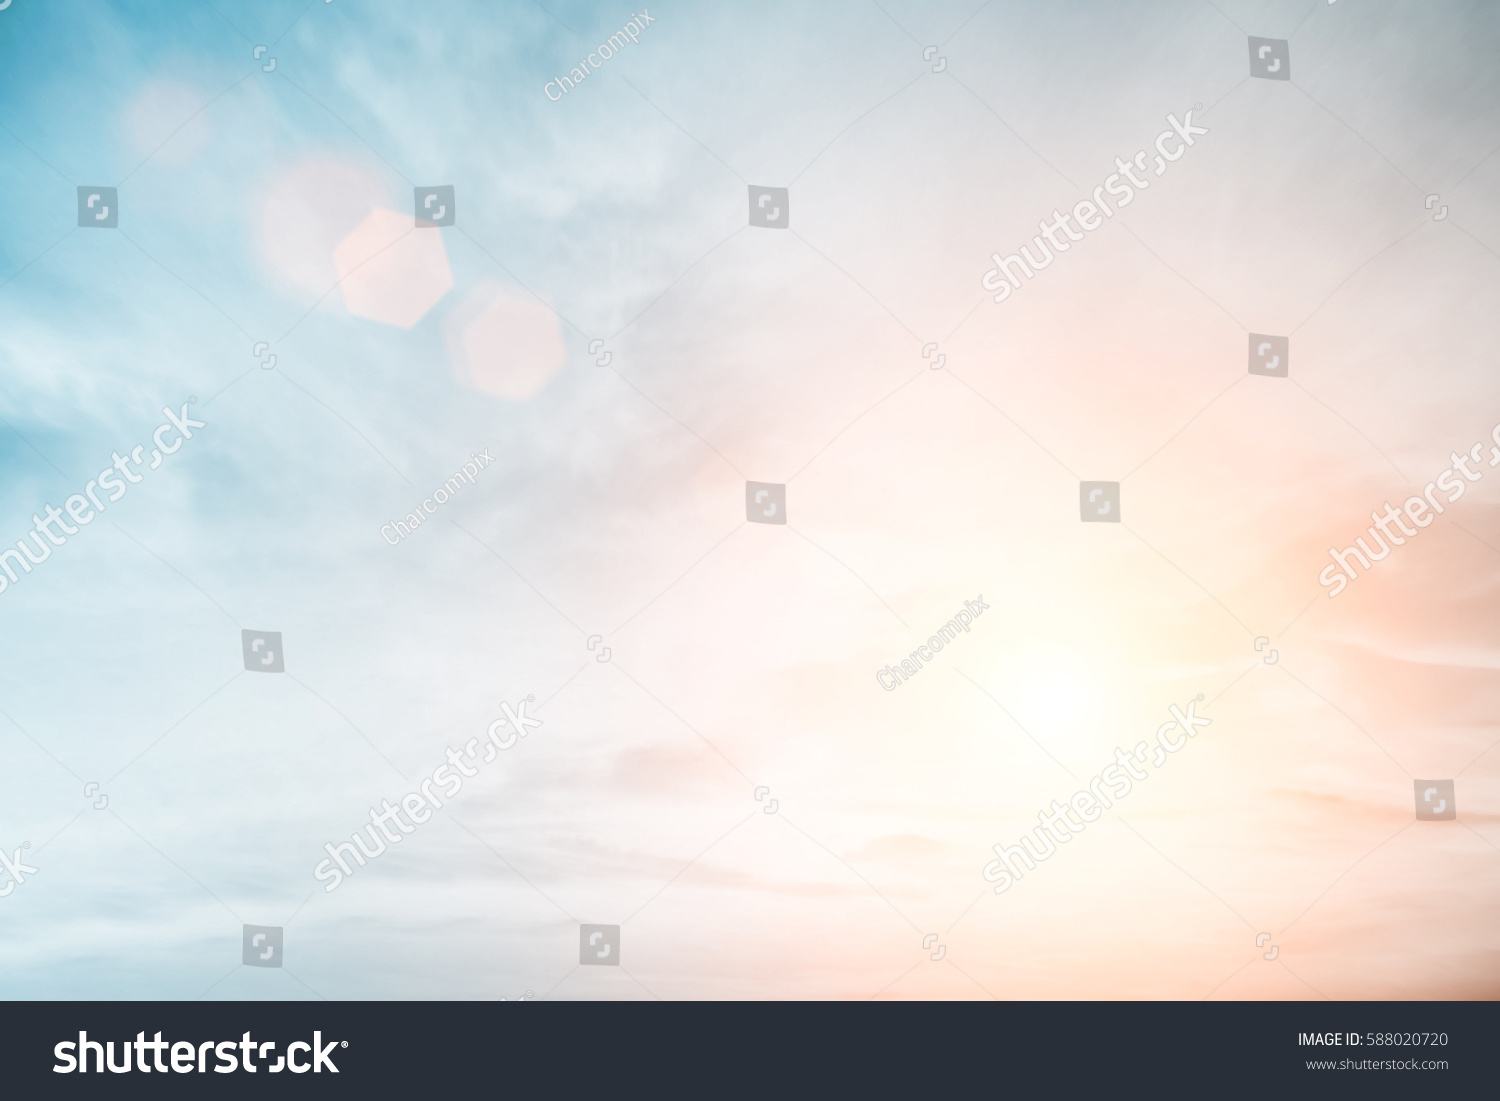 Sunshine clouds sky during morning background. Blue,white pastel heaven,soft focus lens flare sunlight. Abstract blurred cyan gradient of peaceful nature. Open view out windows beautiful summer spring #588020720